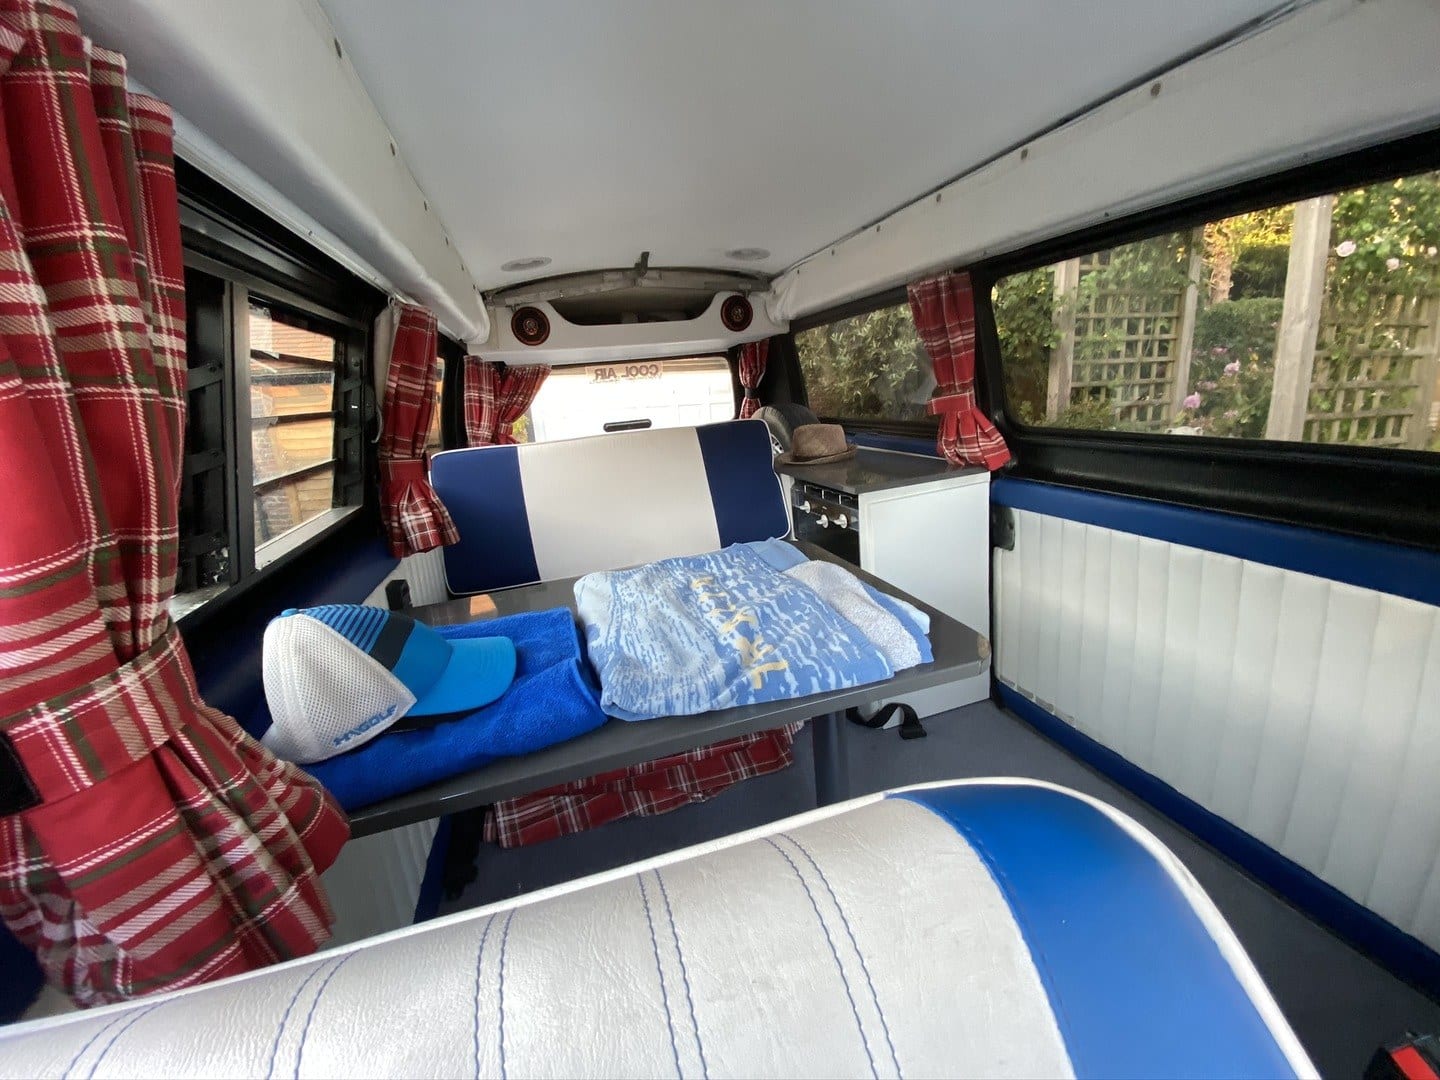 Sleep in a V W Campervan with Short Stay Homes